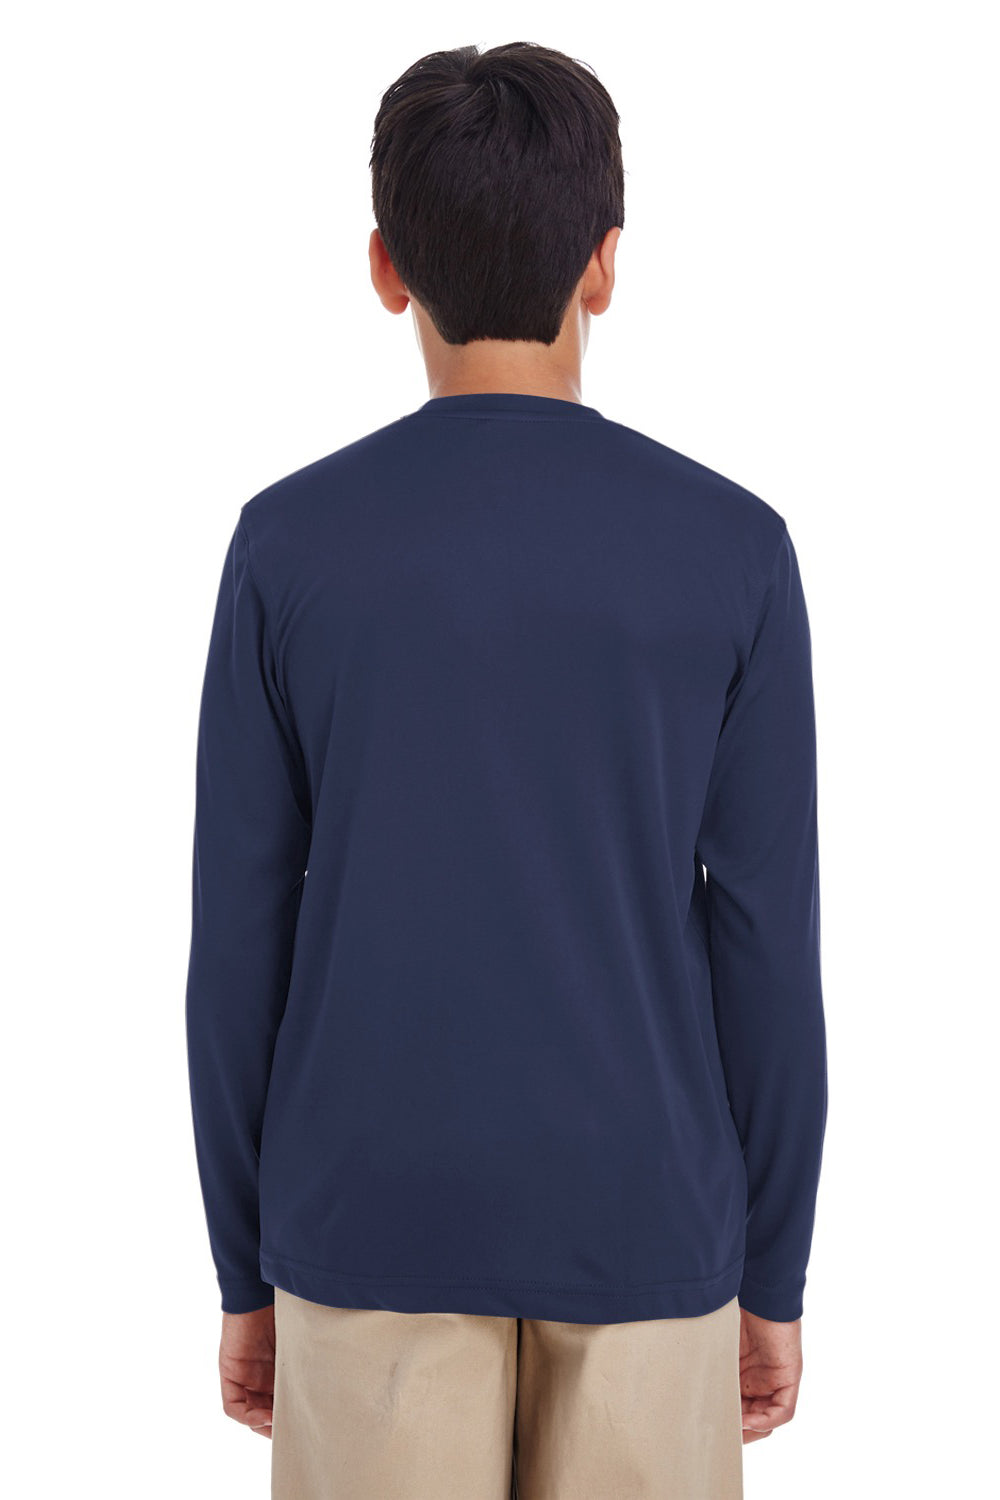 UltraClub 8622Y Youth Cool & Dry Performance Moisture Wicking Long Sleeve Crewneck T-Shirt Navy Blue Back